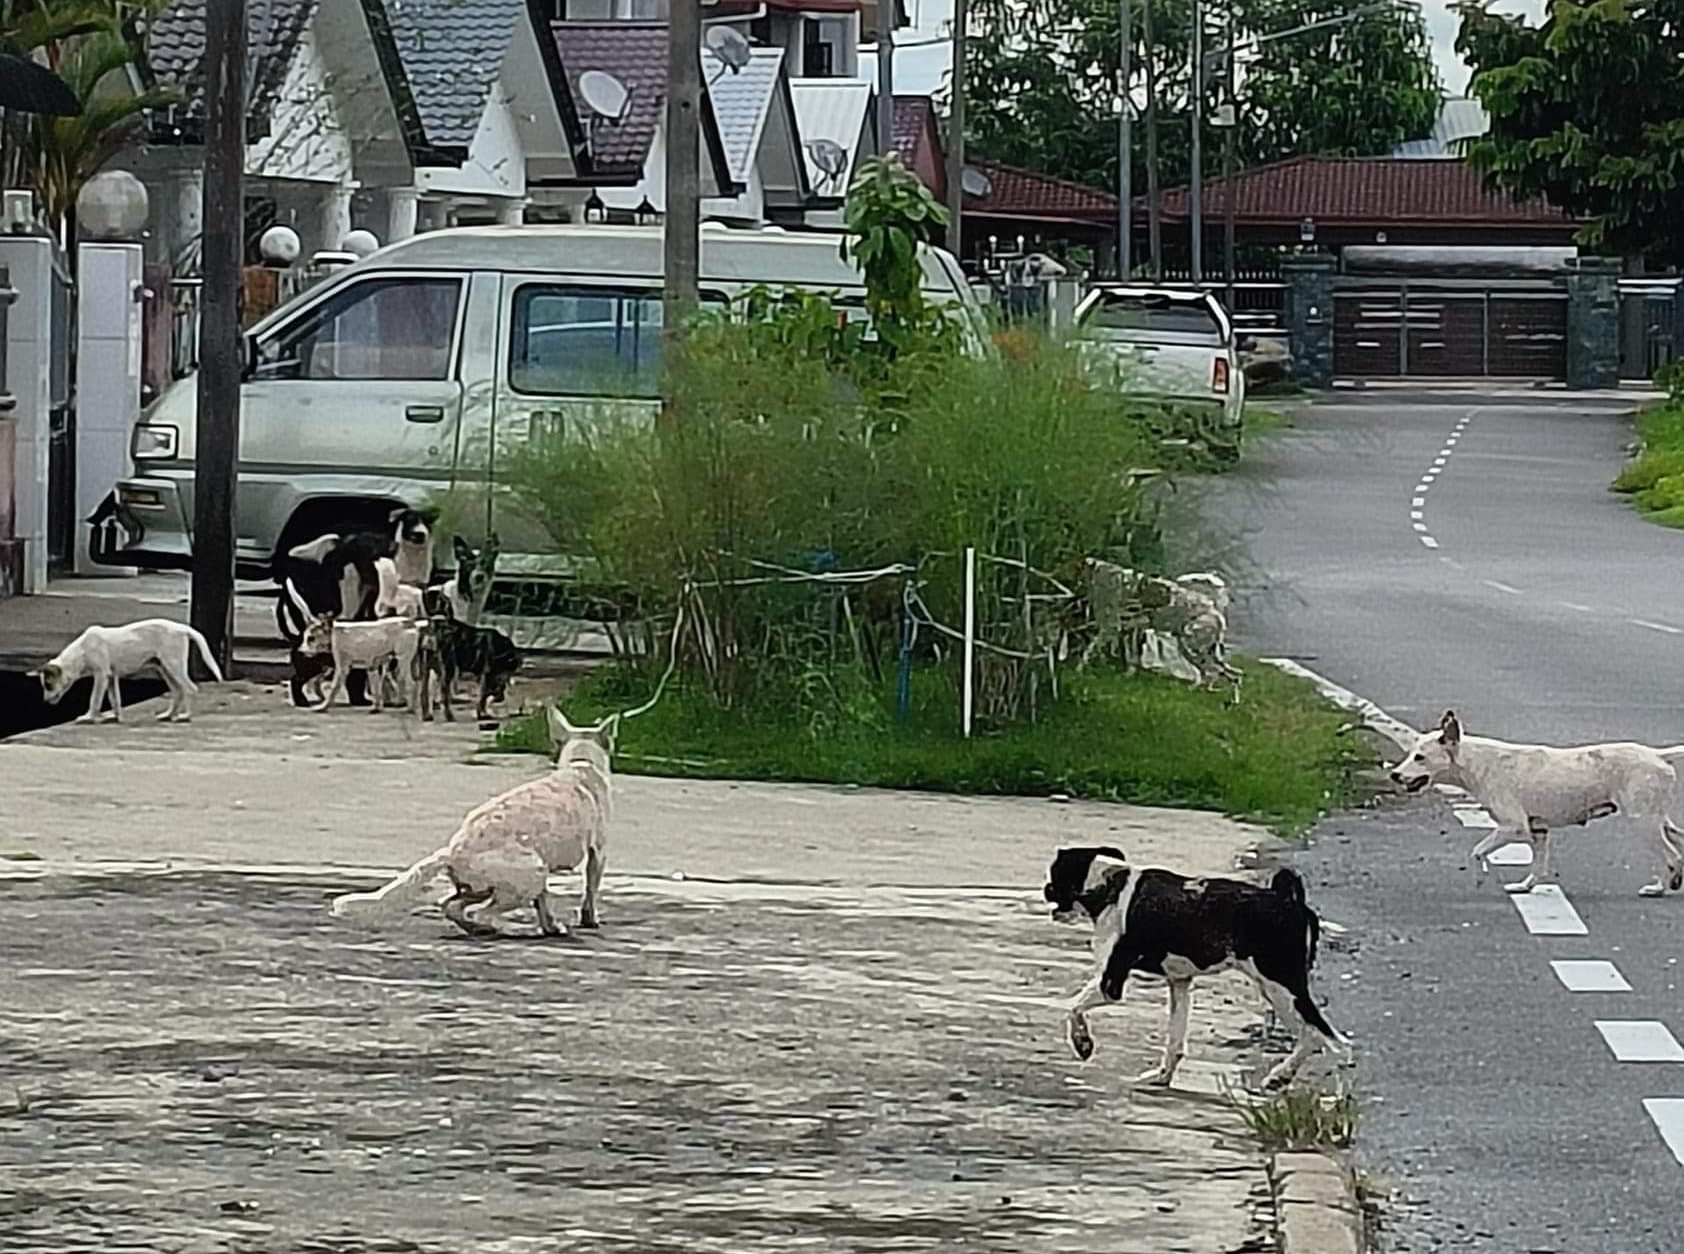 Miri City Council seeks public cooperation to curb potential spread of rabies